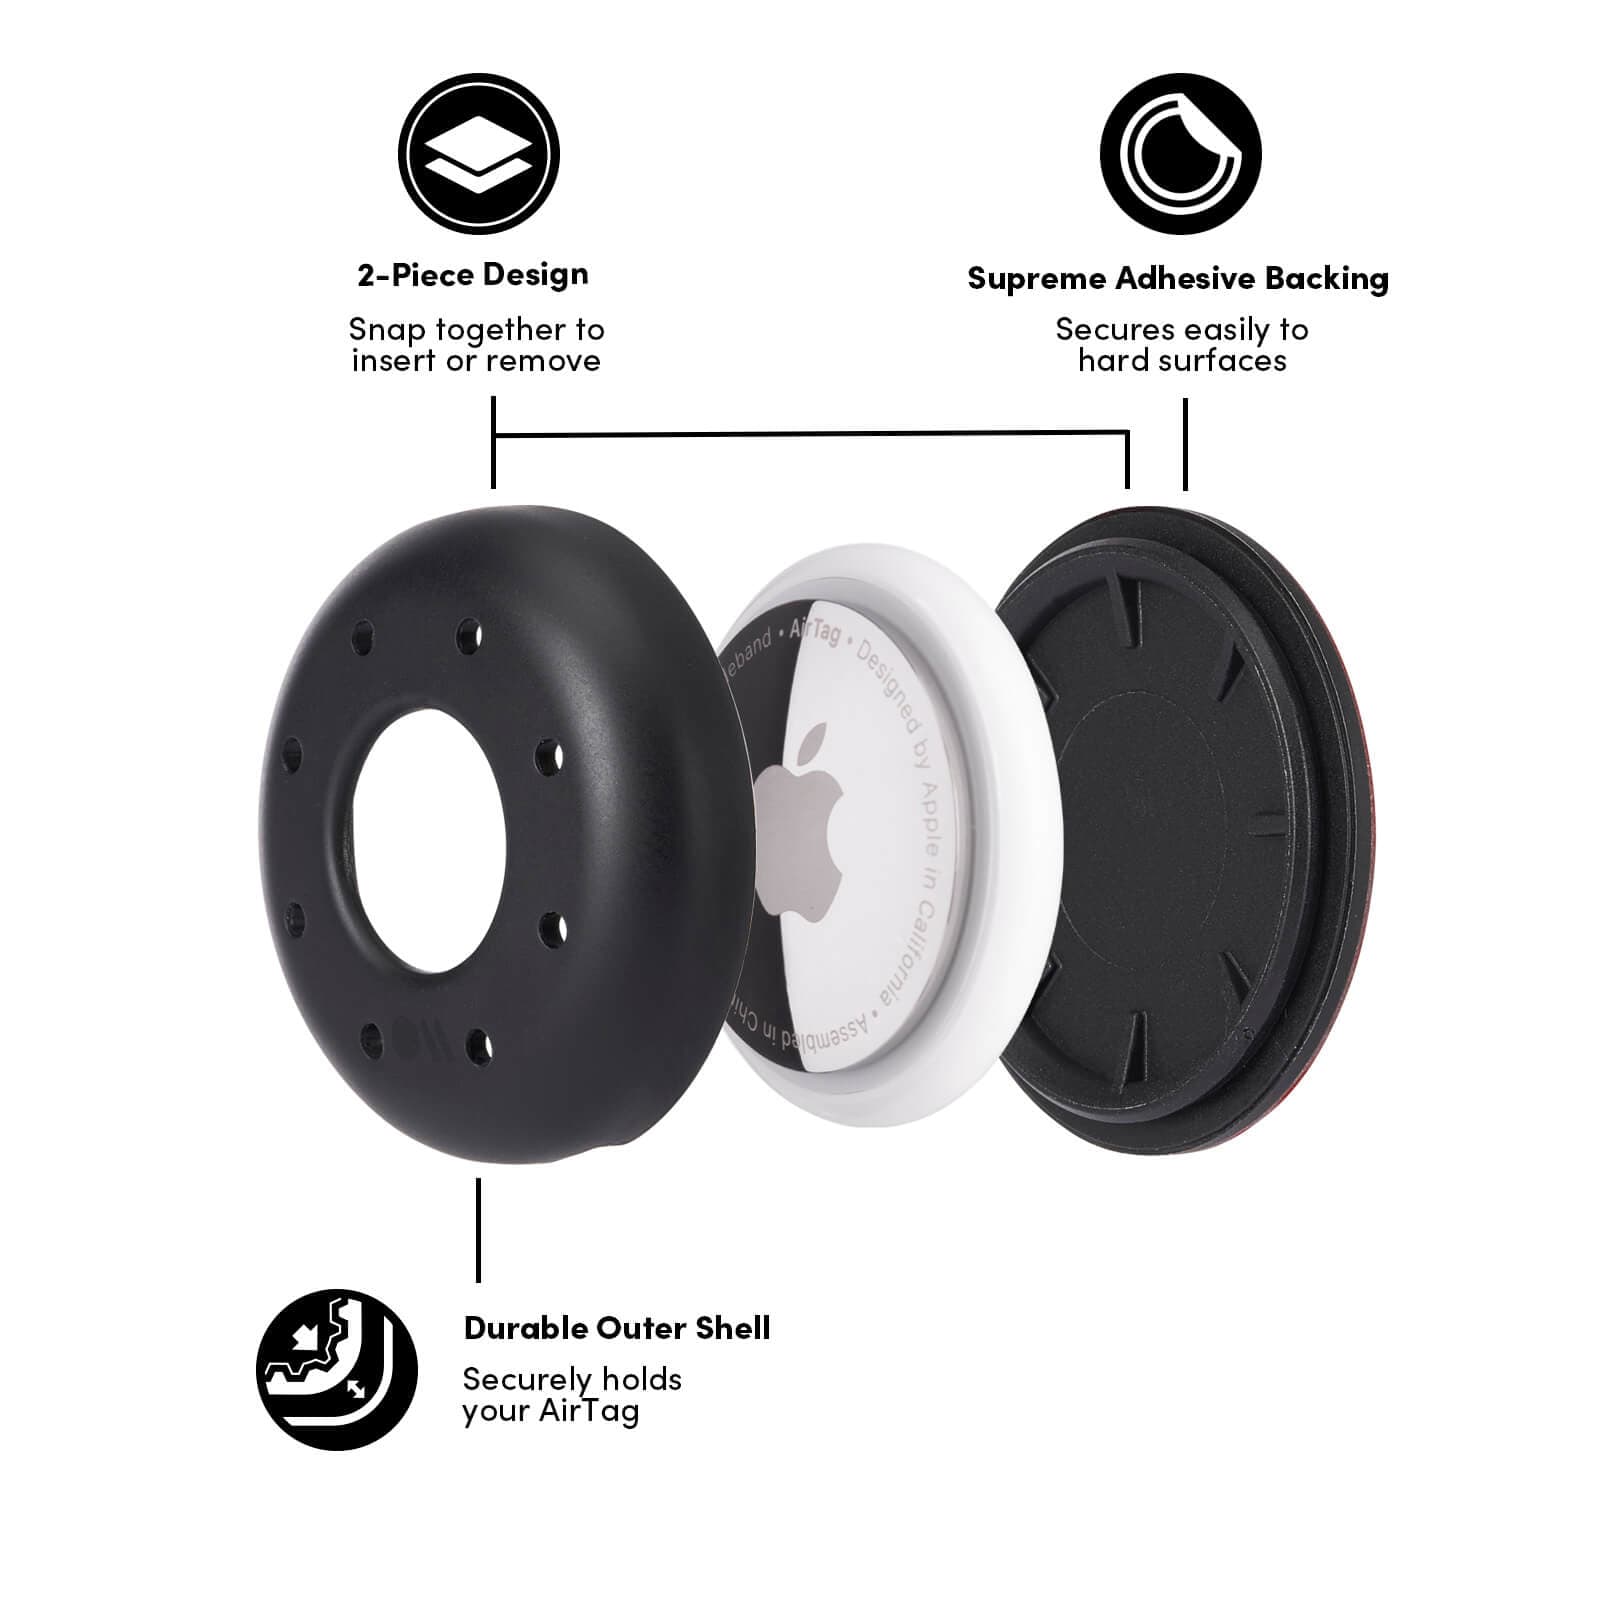 Features: 2- Piece Design, Snap together to insert or remove. Supreme Adhesive Backing, Secures easily to hard surfaces. Durable Outer Shell, Securely holds your AirTag. color::Black